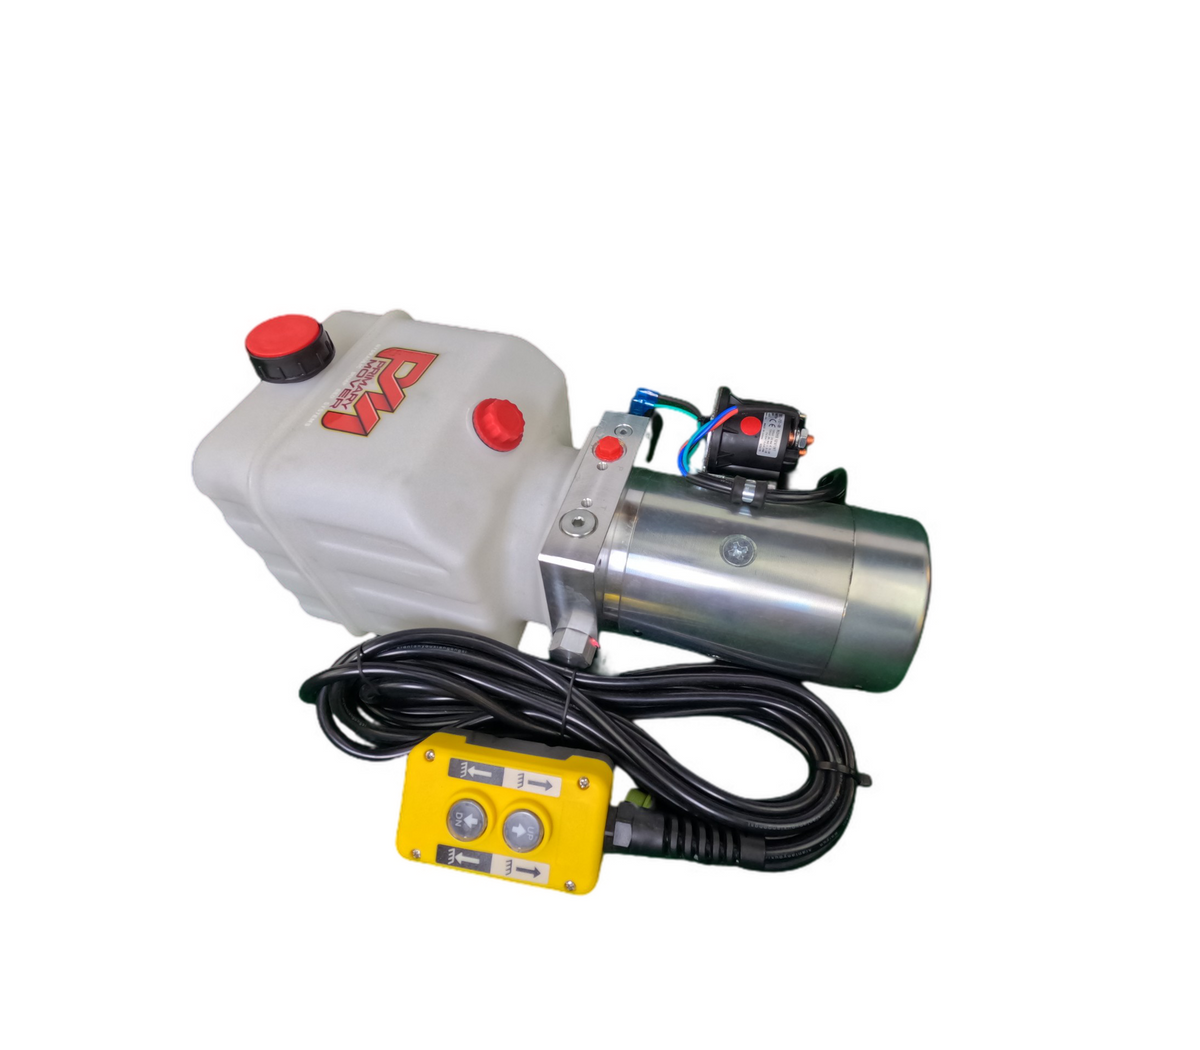 Single-acting DLH 12V hydraulic pump with poly reservoir, featuring a red button, black cord, and durable construction for efficient dump bed operations.